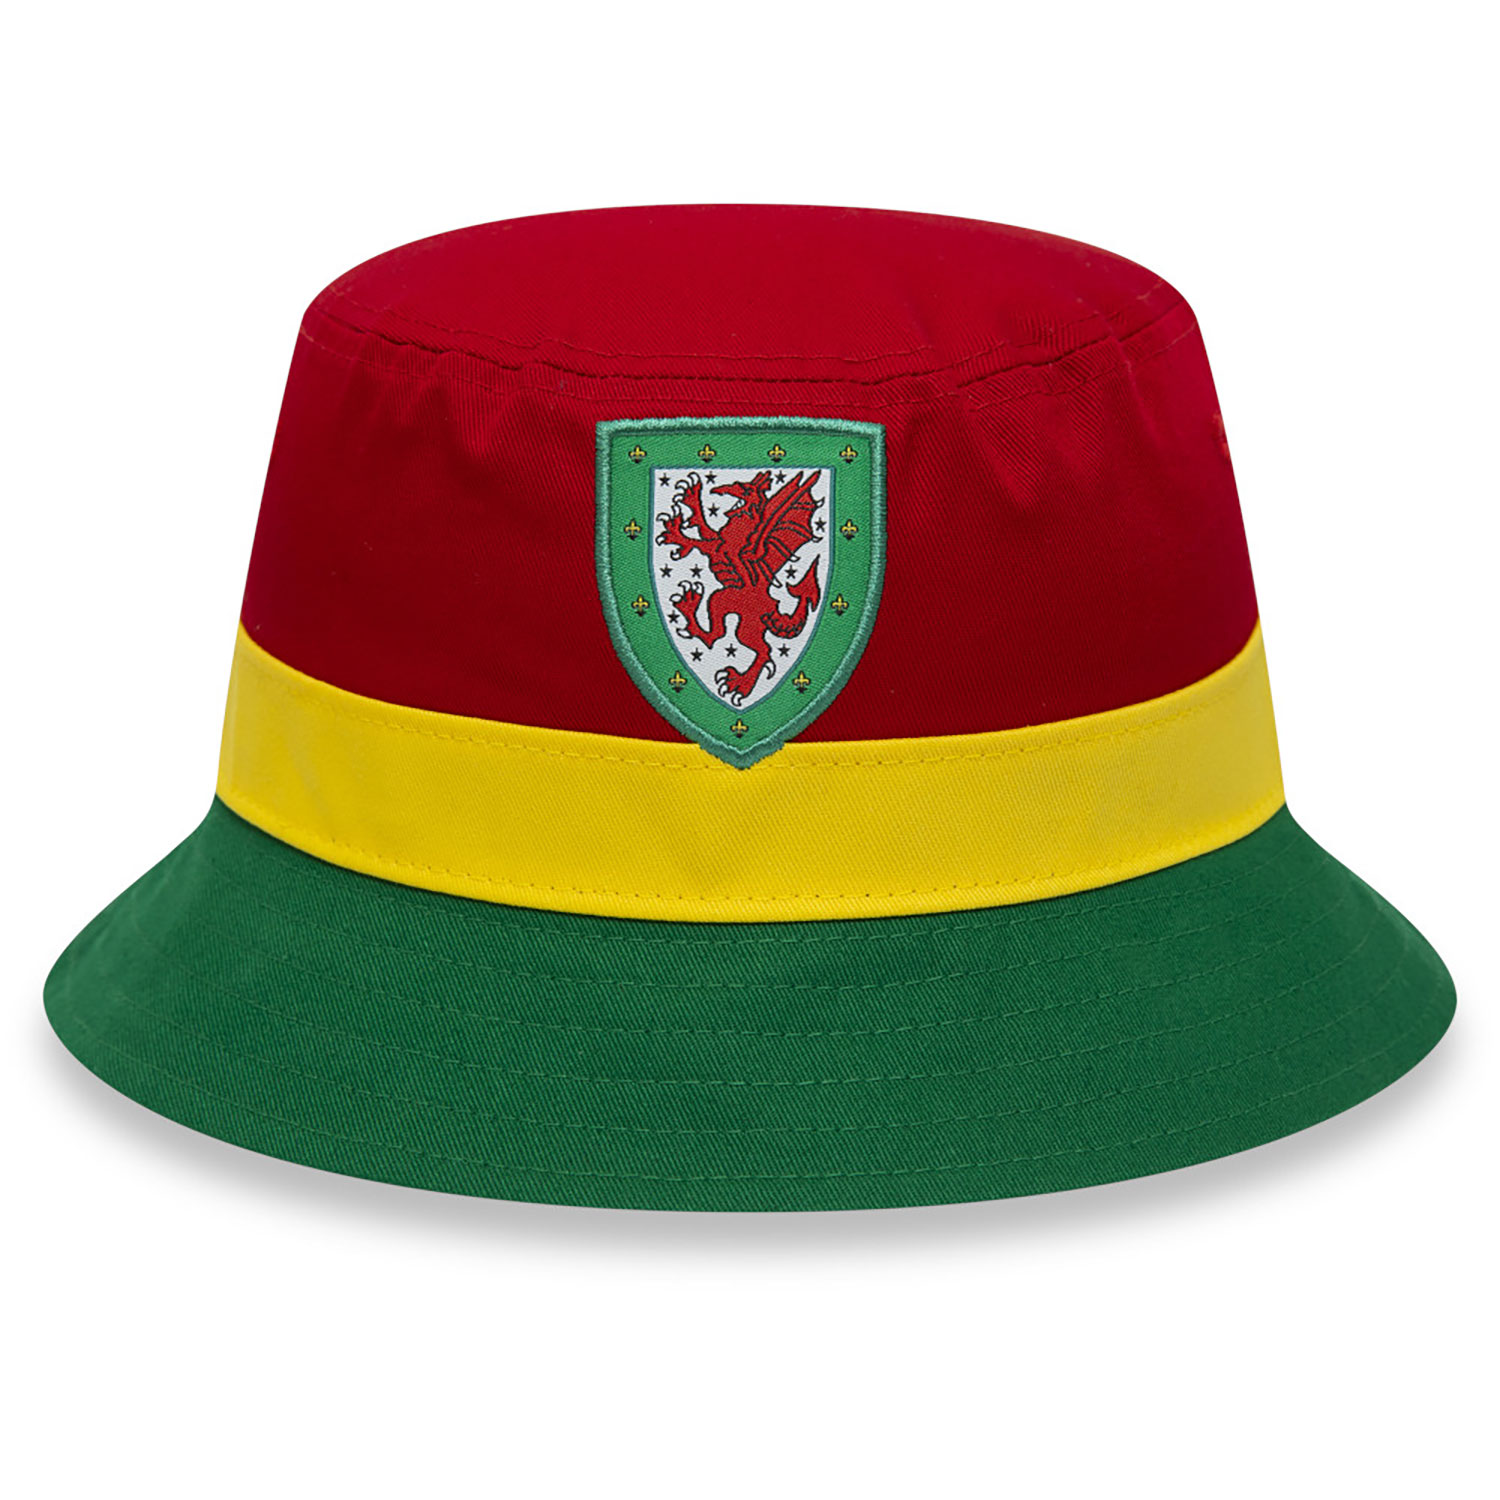 Football Association Of Wales Red Bucket Hat